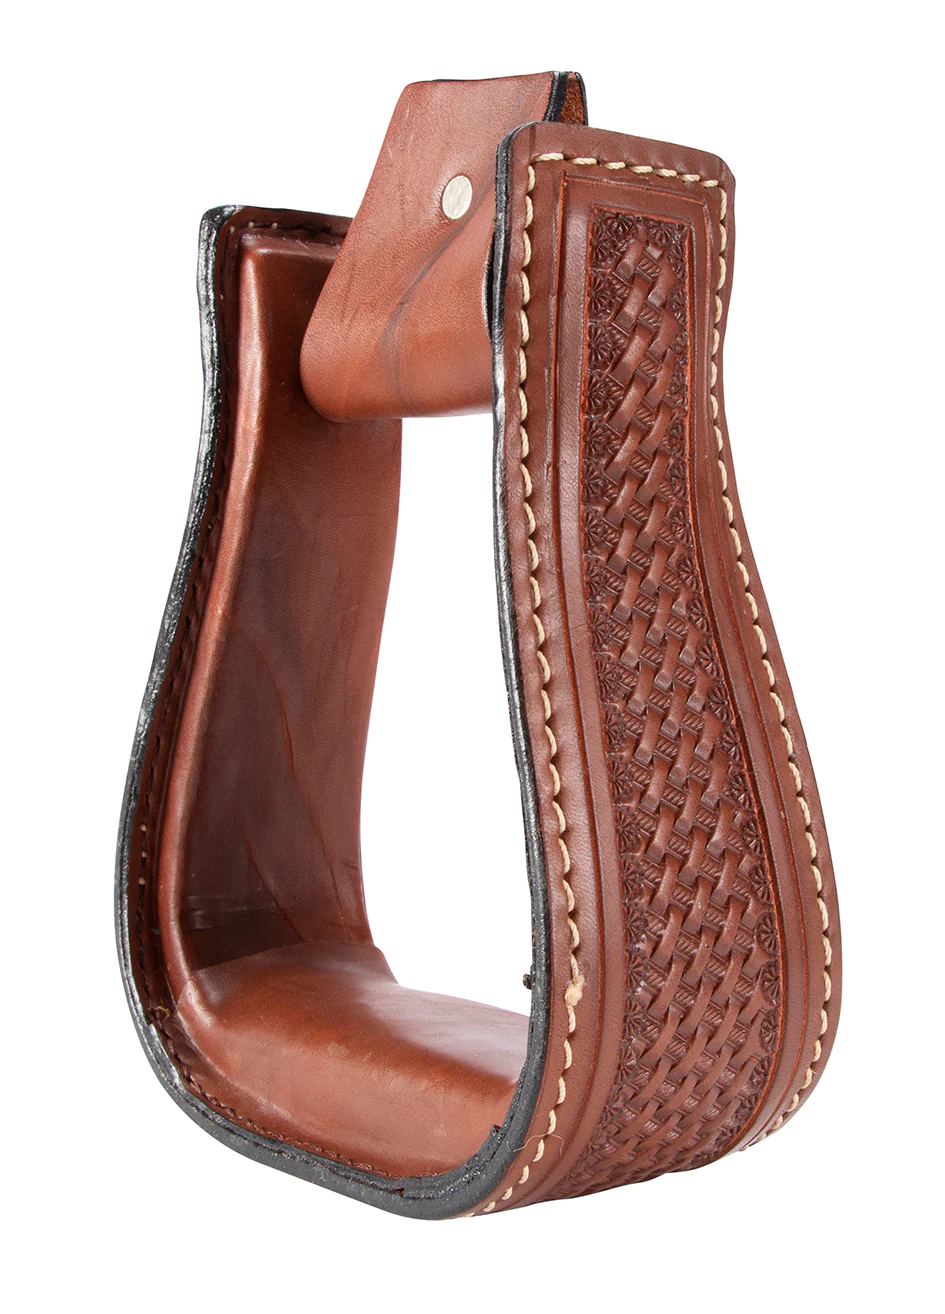 Fort Worth Leather Covered Oxbows